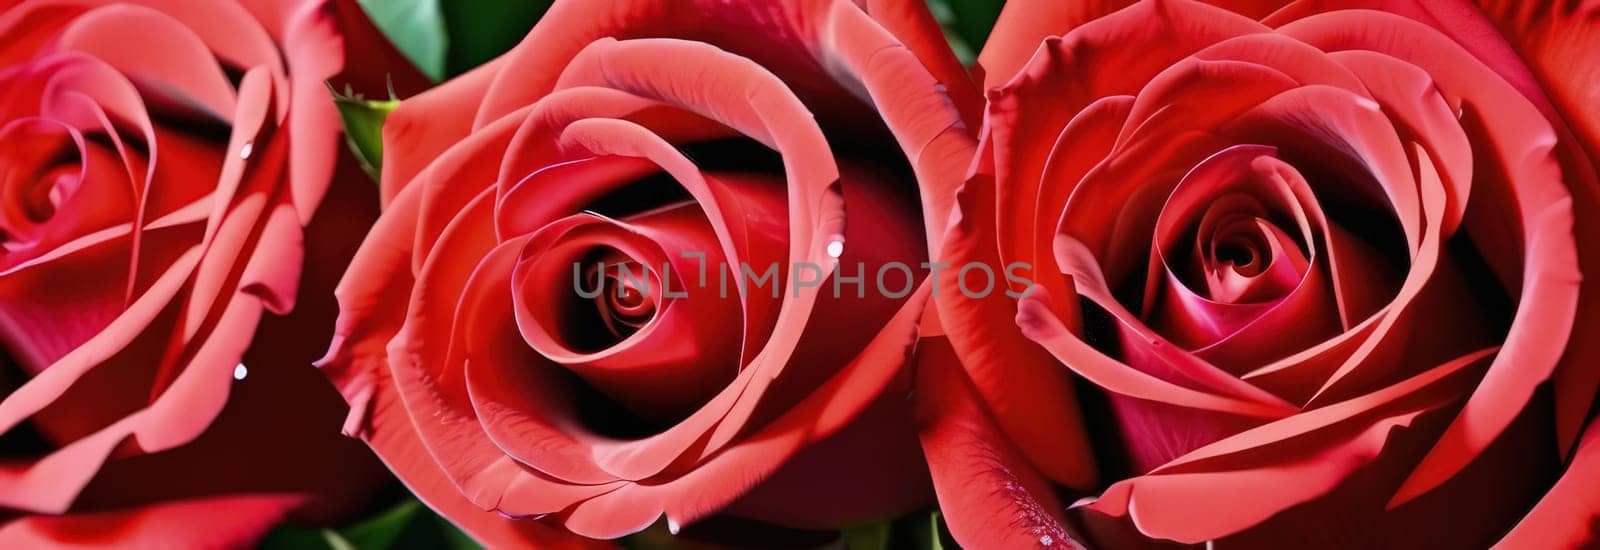 Beautiful banner with red roses background of Mothers, Valentine Day, Birthday, Anniversary, Wedding. Copy space. For advertisement, greeting card mockup, presentation, header, poster, website print